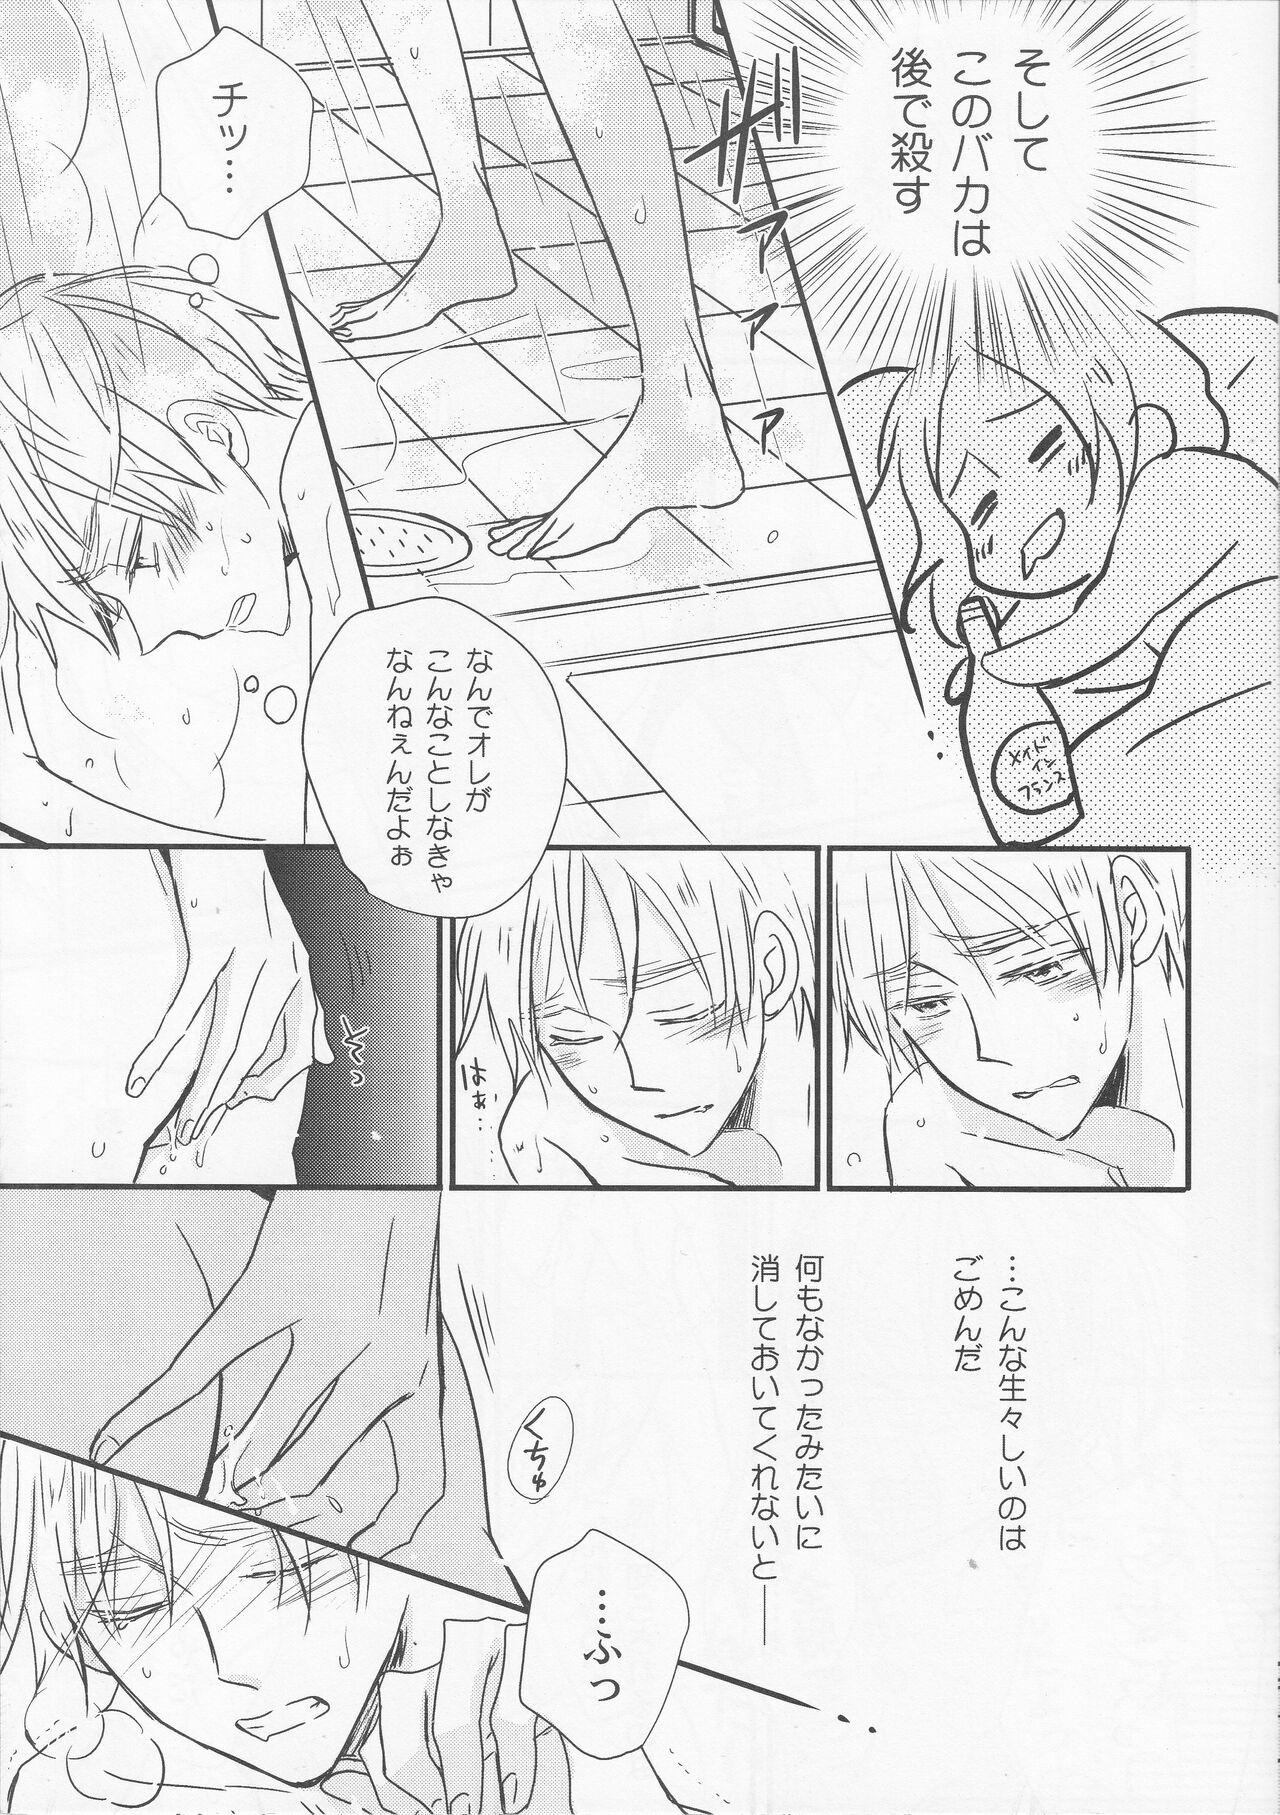 Guys unknown title - Axis powers hetalia Mamada - Page 6